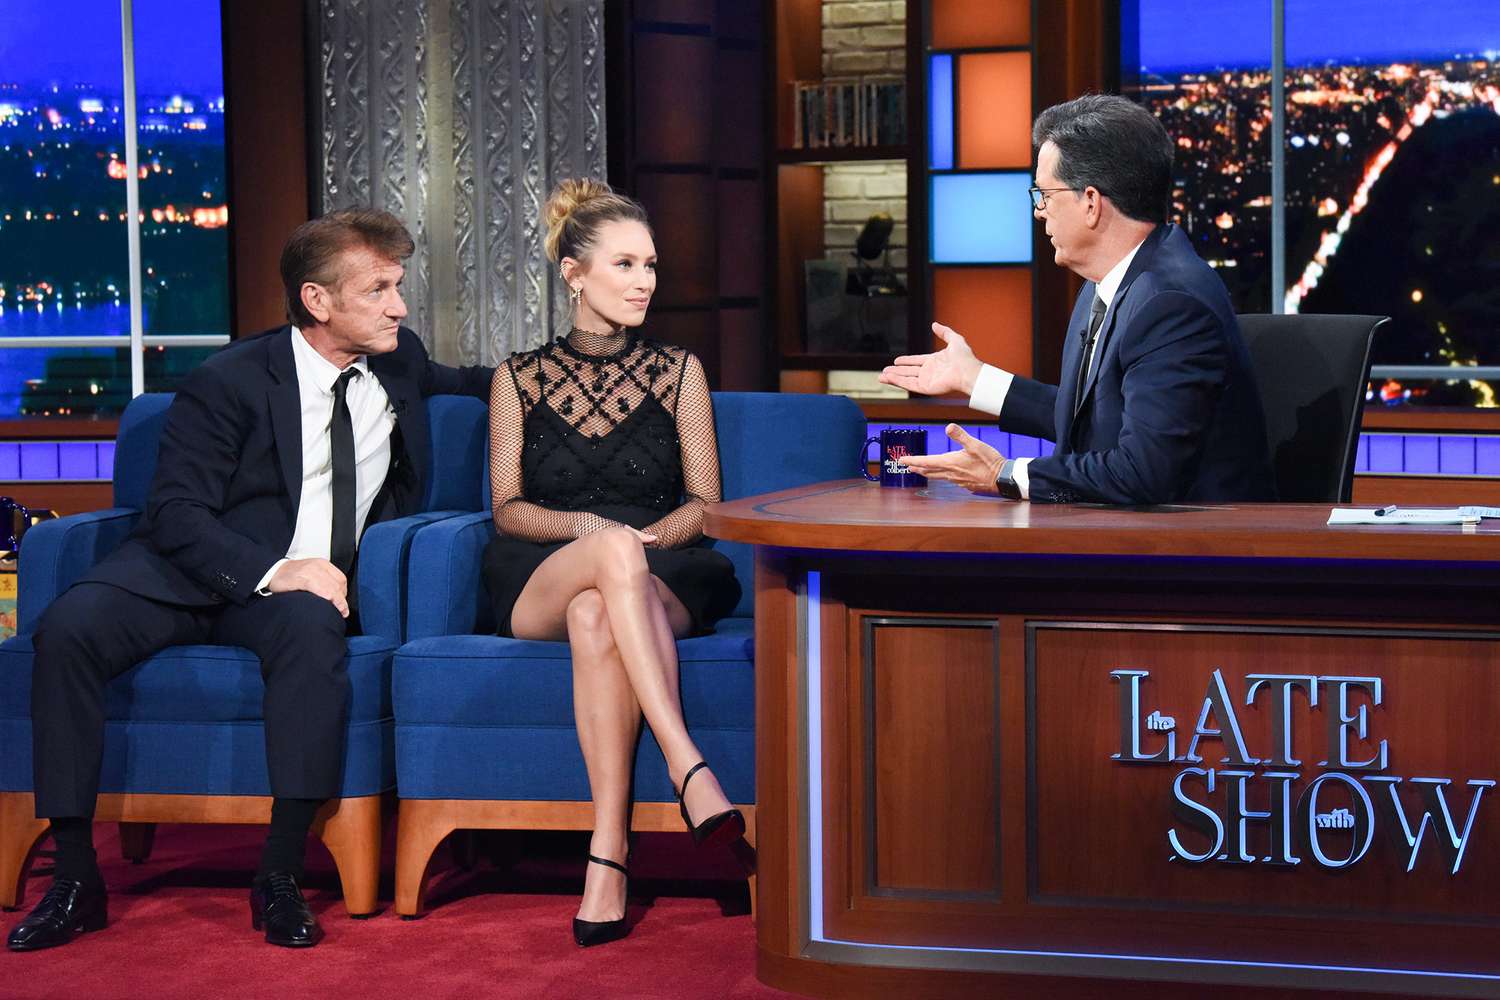 The Late Show with Stephen Colbert and guest Sean Penn and Dylan Penn